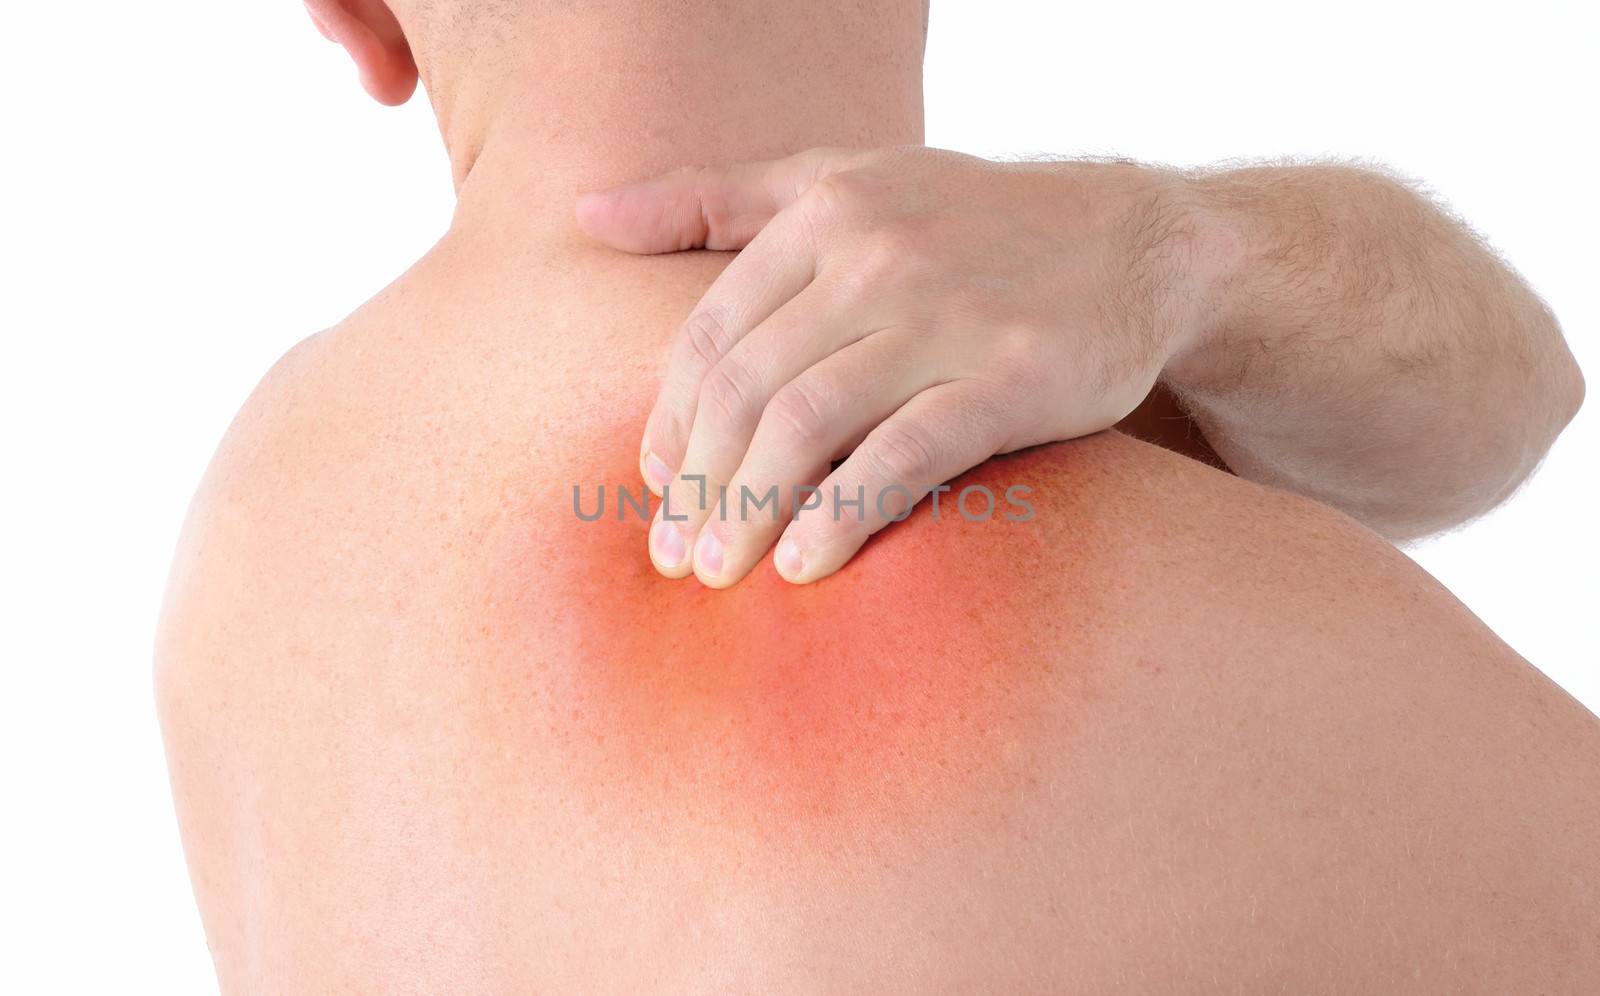 pain in neck and back isolated on a white background